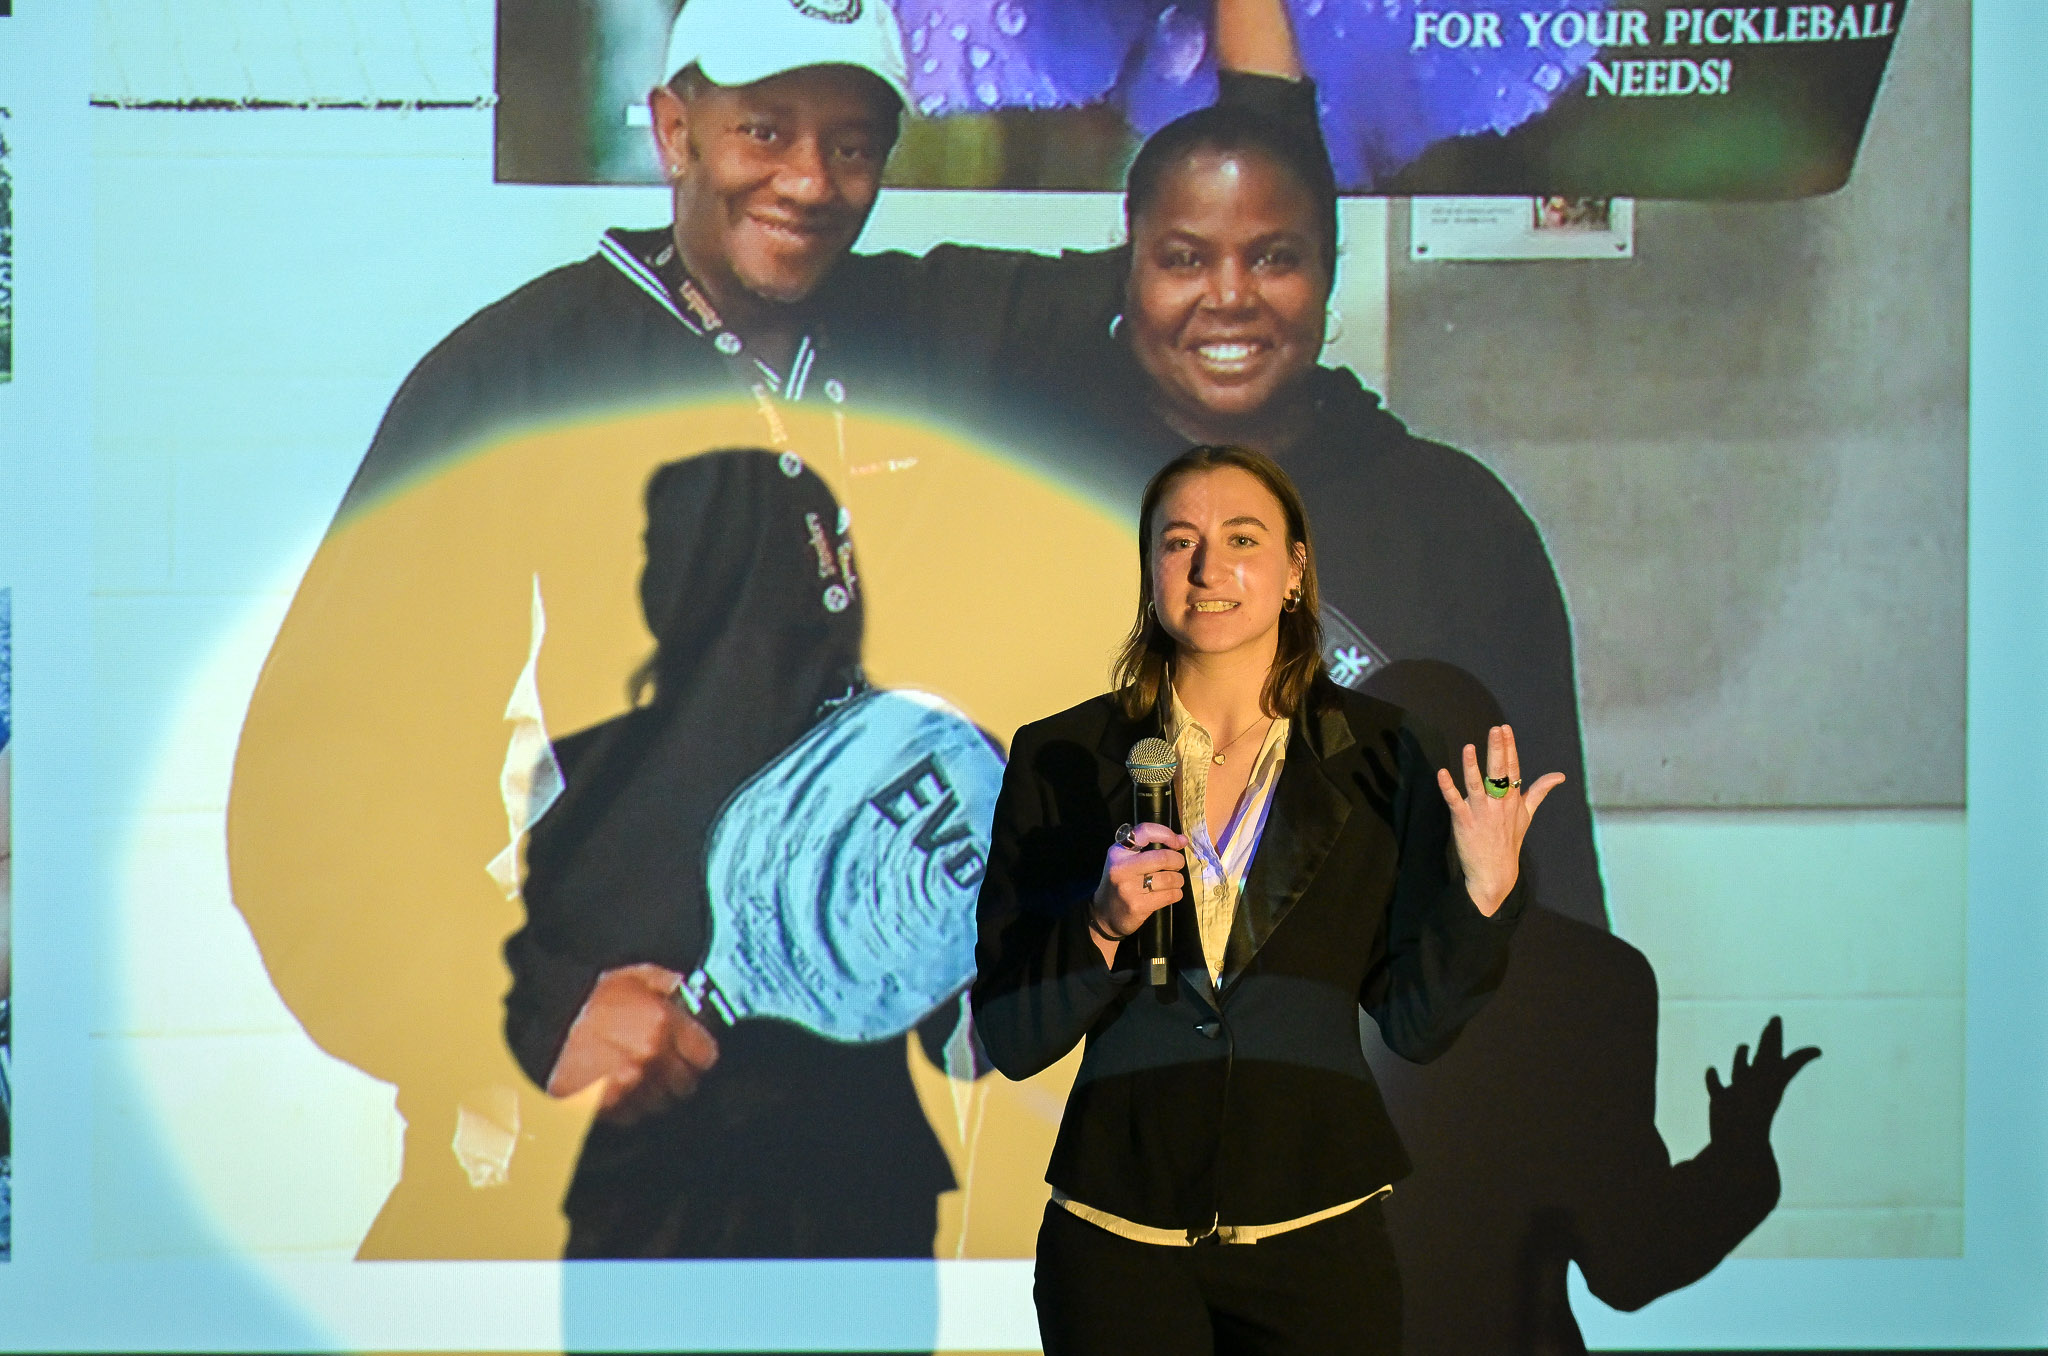 Female student speaks into a microphone in front of a screen with a photo of pickleball players.